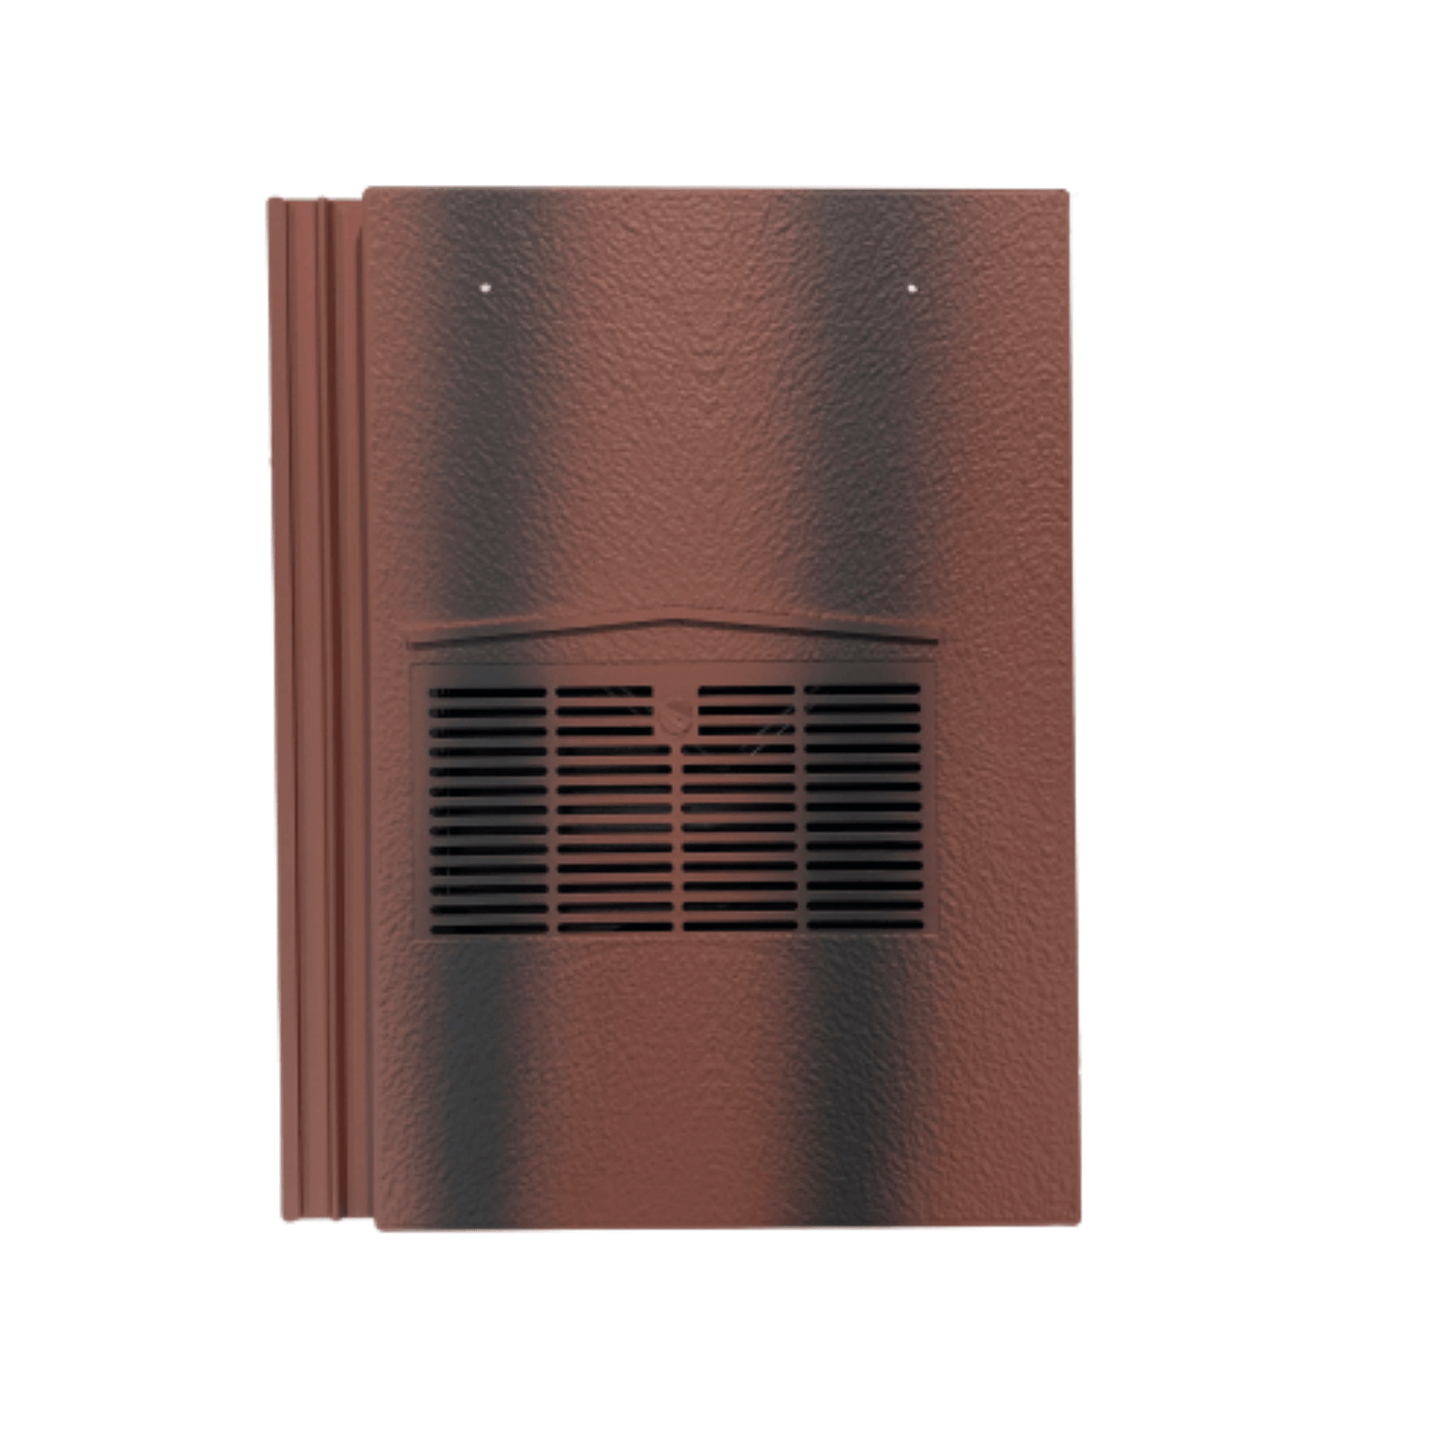 Marley Modern Vent Tile Old English Dark Red Smooth - Beddoes Products